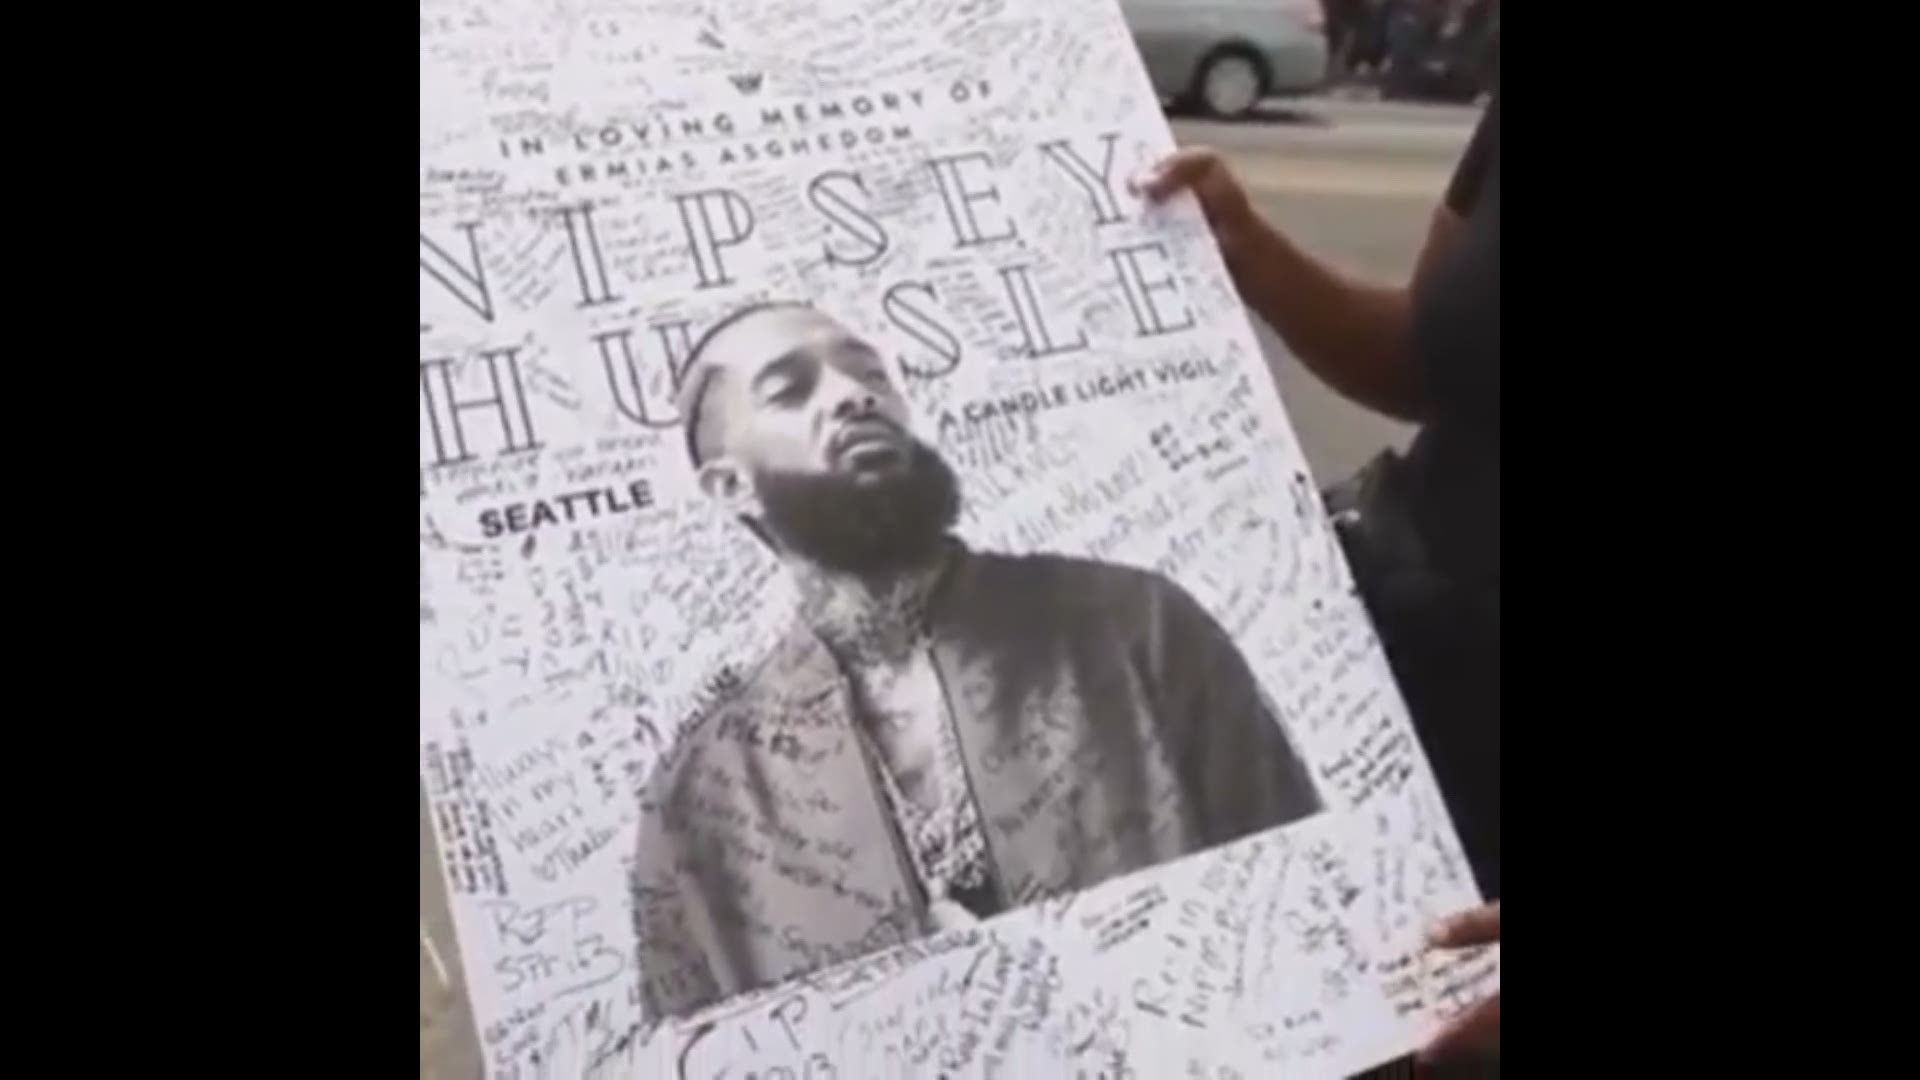 Antonesha organized a memorial for Nipsey Hussle in Seattle. Then she took a signed poster to Los Angeles to honor him.